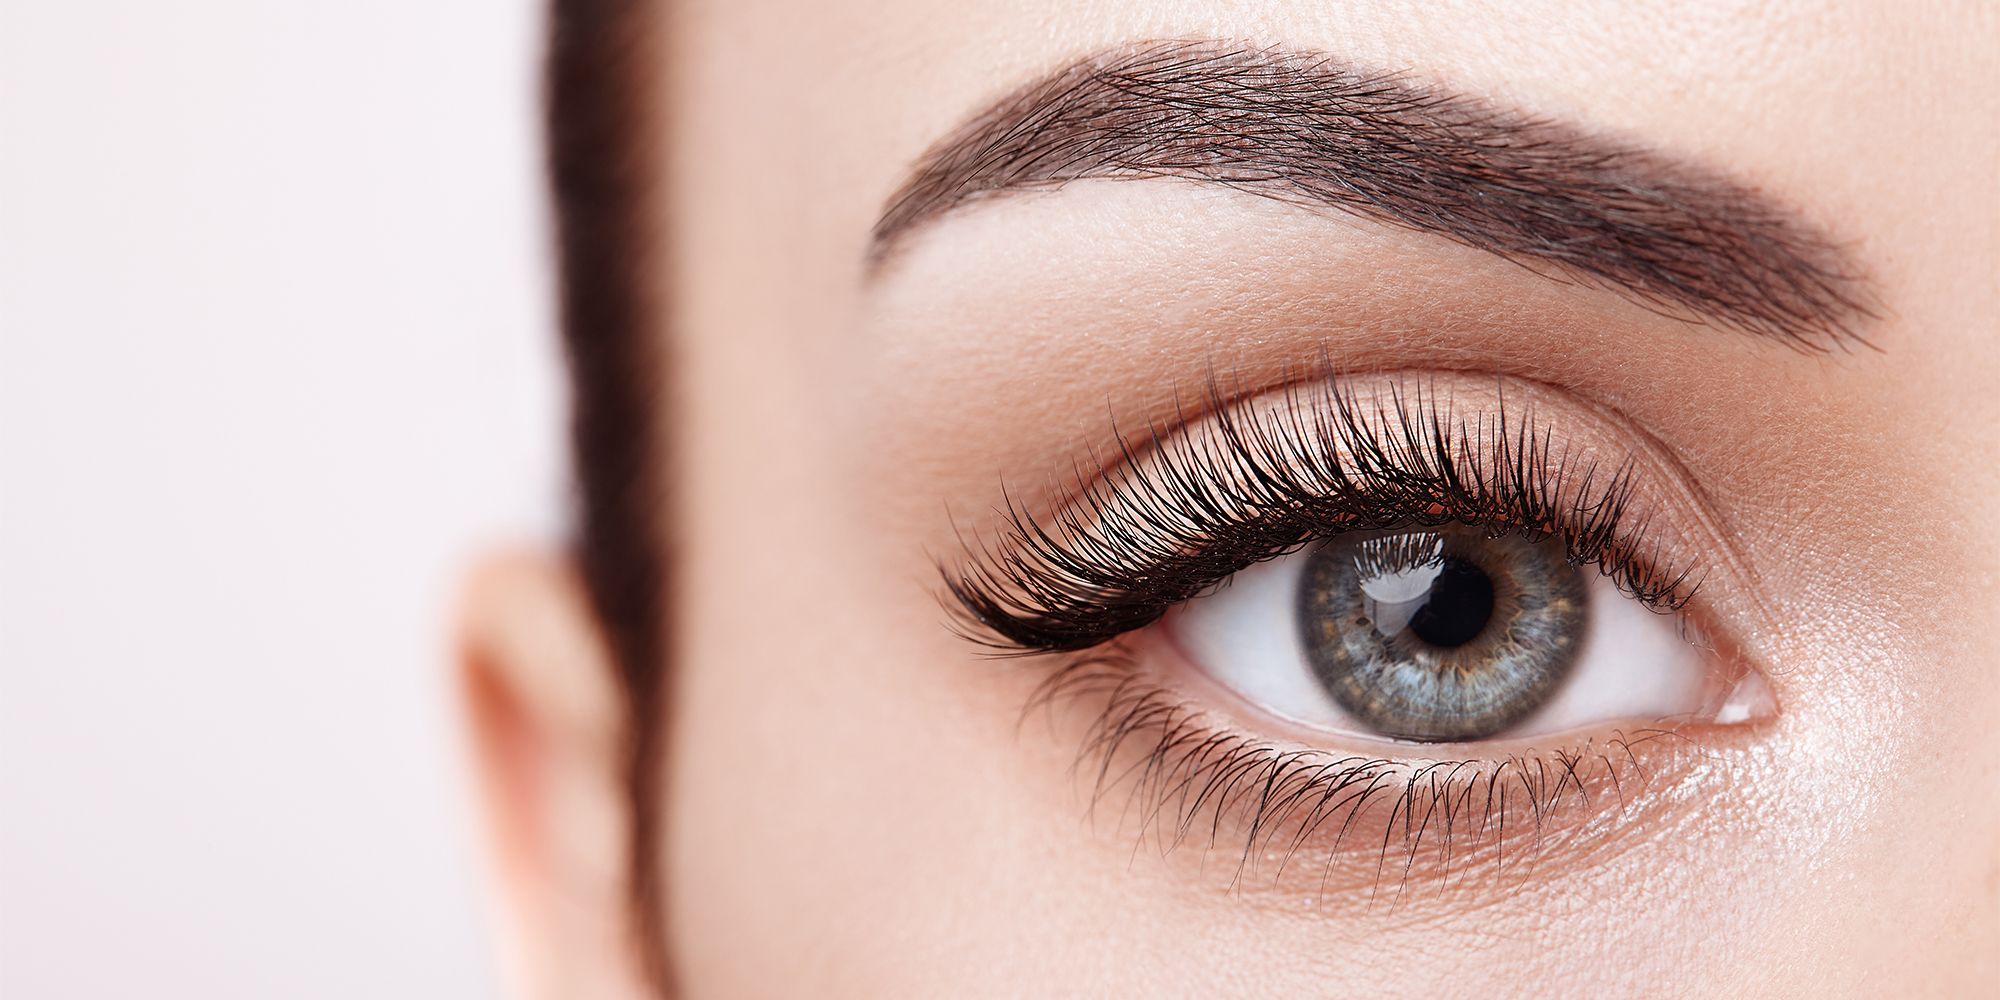 What Is Eyebrow Microshading? Cost, Results, Photos of Brow Treatment